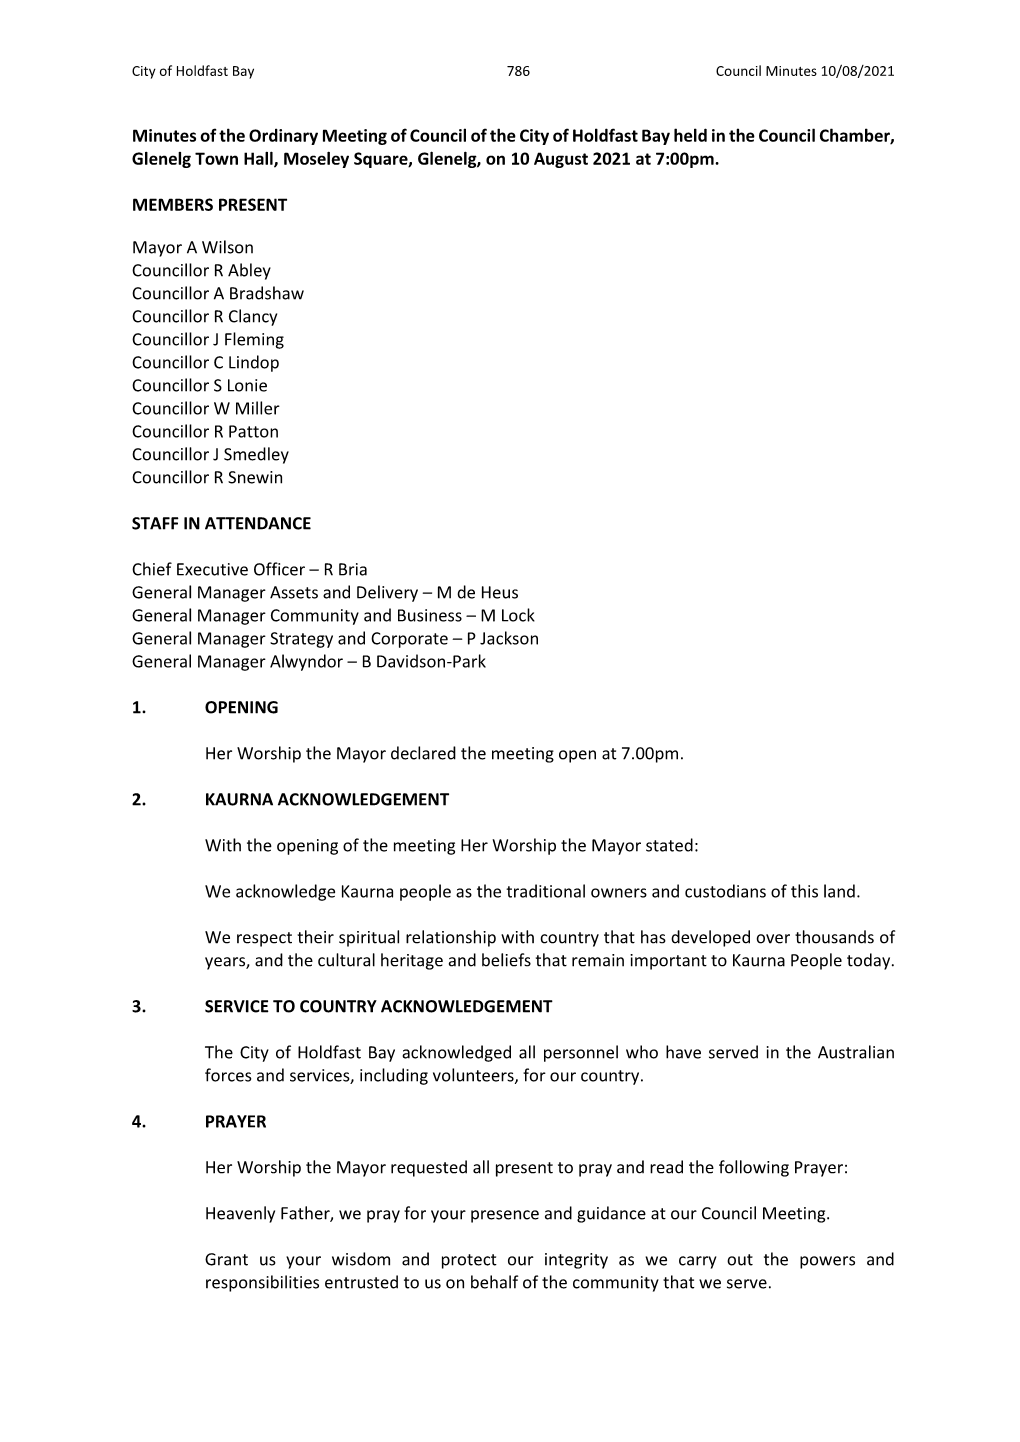 Minutes of the Ordinary Meeting of Council of the City of Holdfast Bay